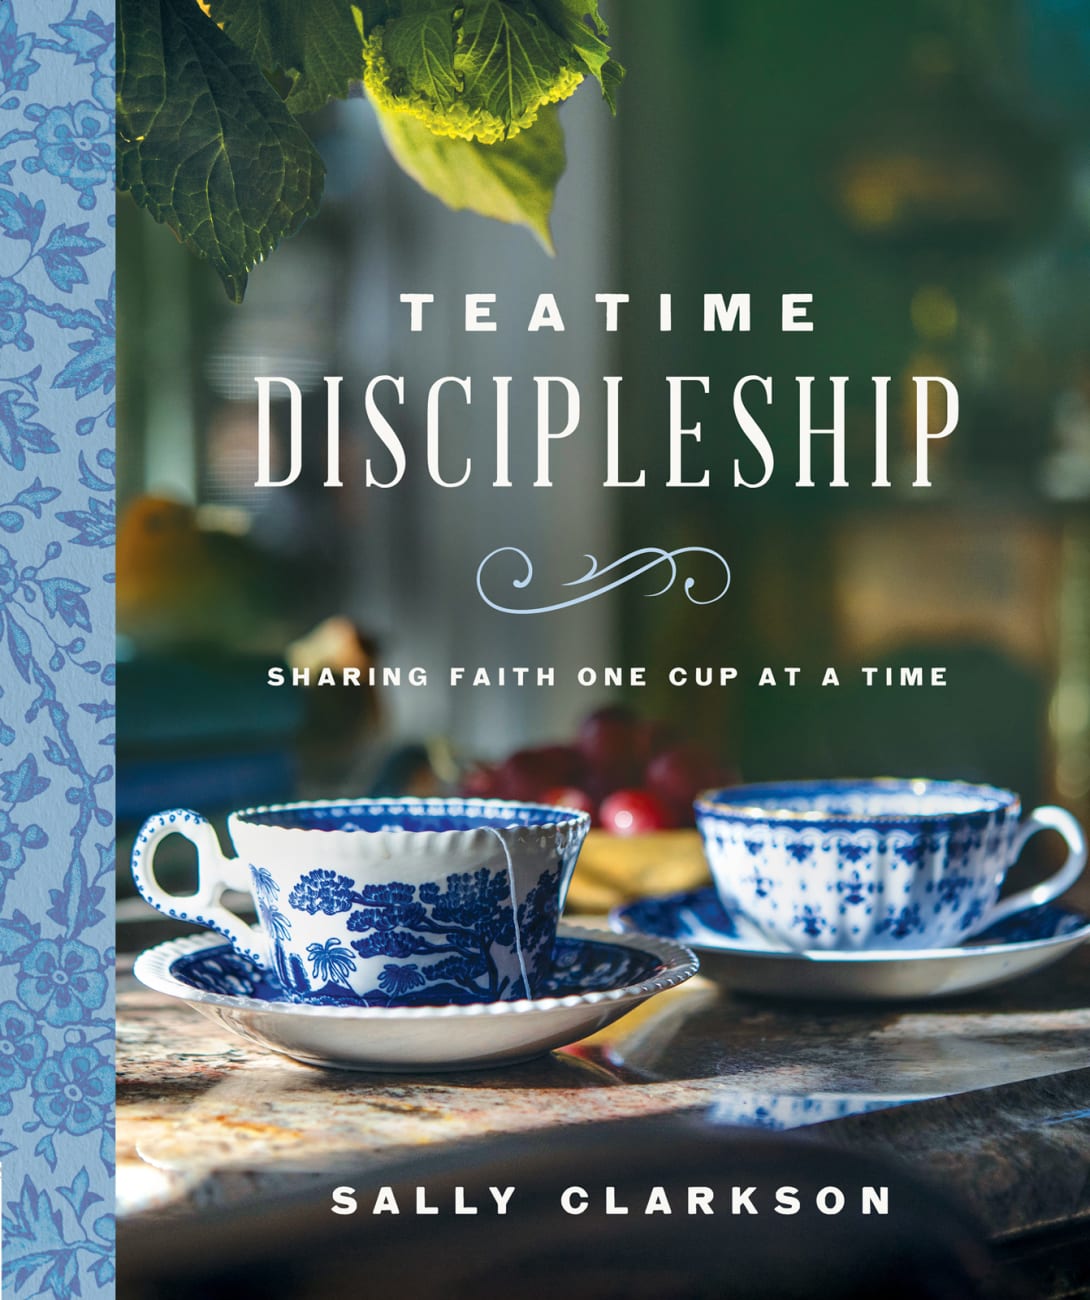 TEATIME DISCIPLESHIP: SHARING FAITH ONE CUP AT A TIME